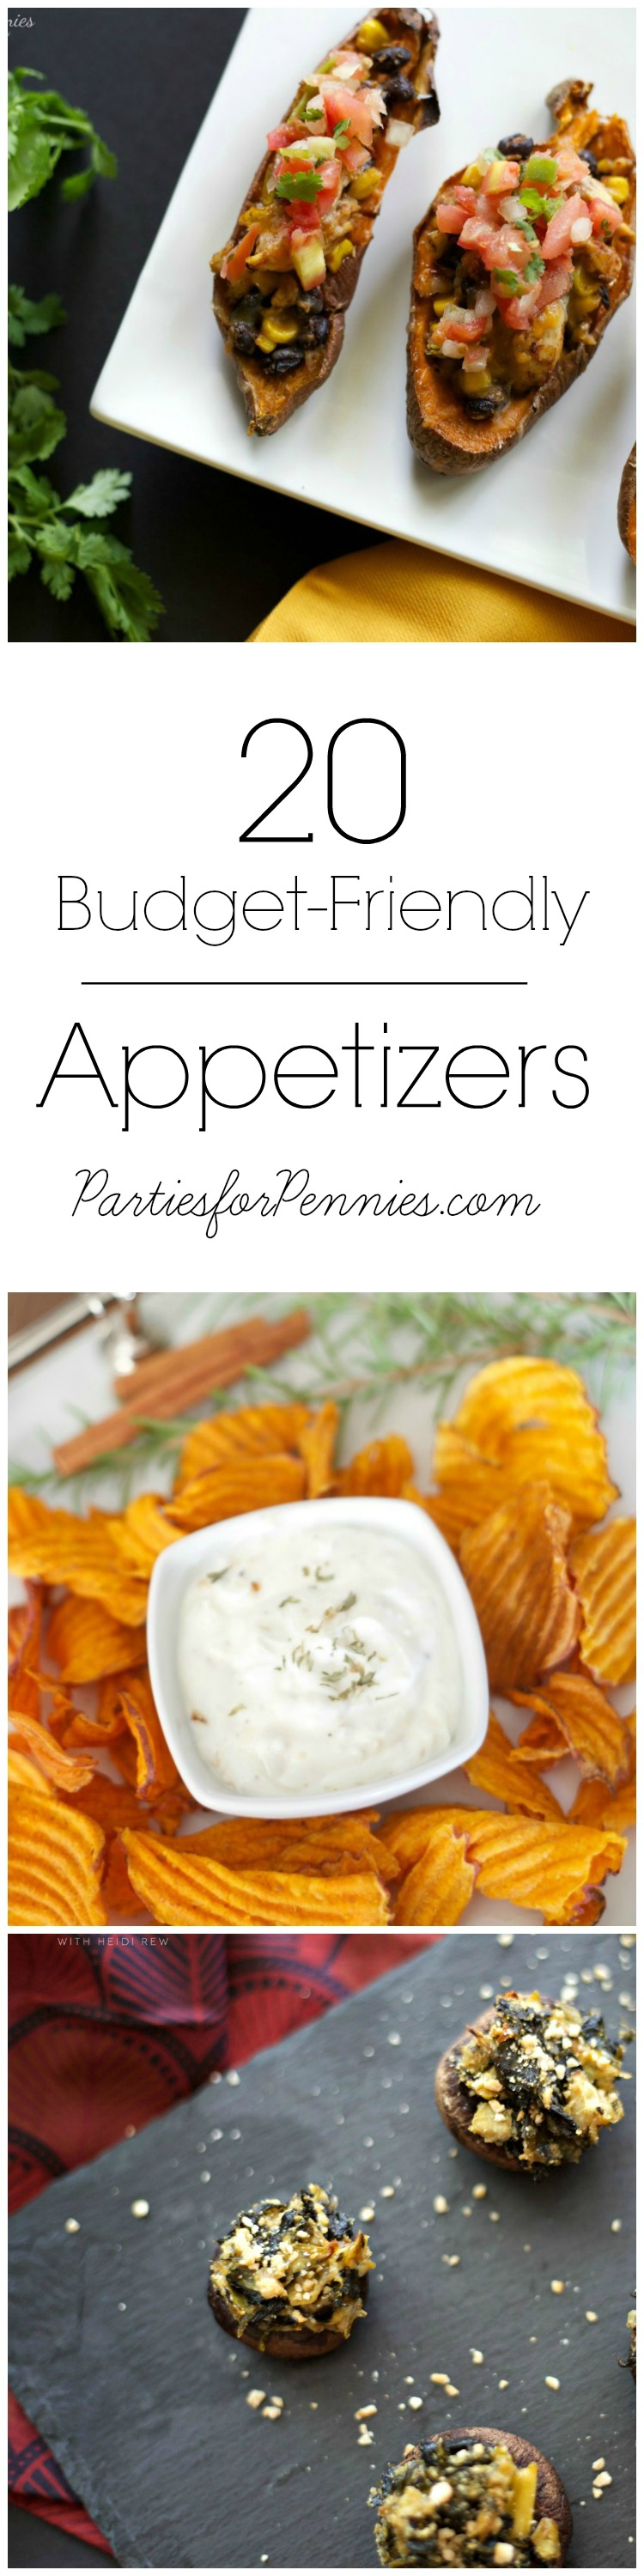 20 Budget-Friendly Appetizers by PartiesforPennies.com